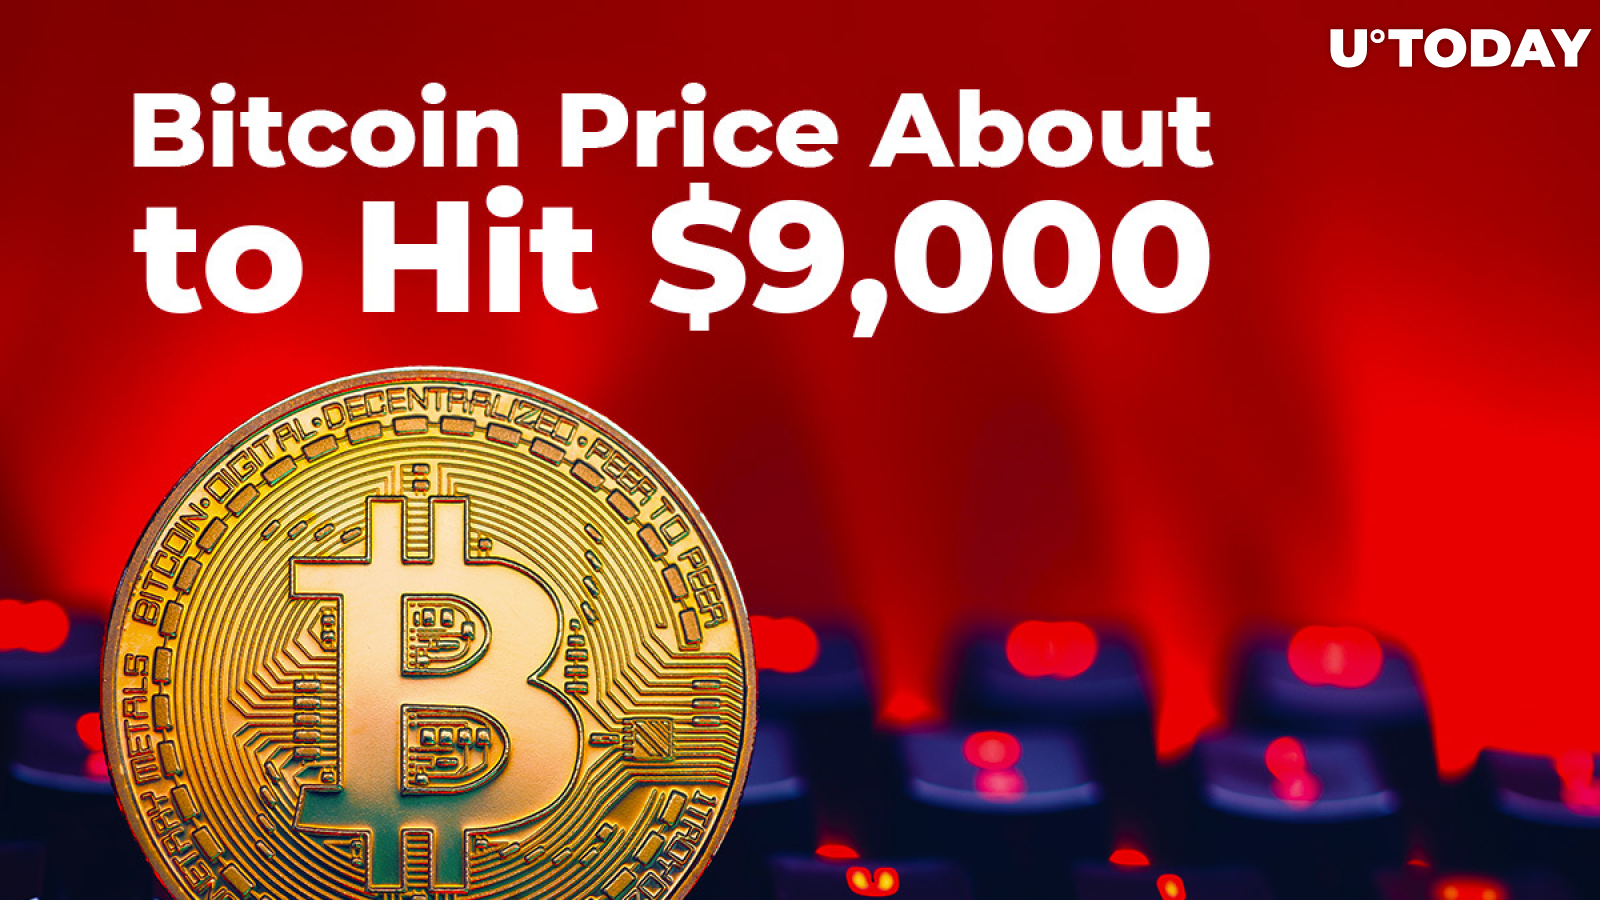 Bitcoin Price About to Hit $9,000, BTC Rises 135% Year-to-Date